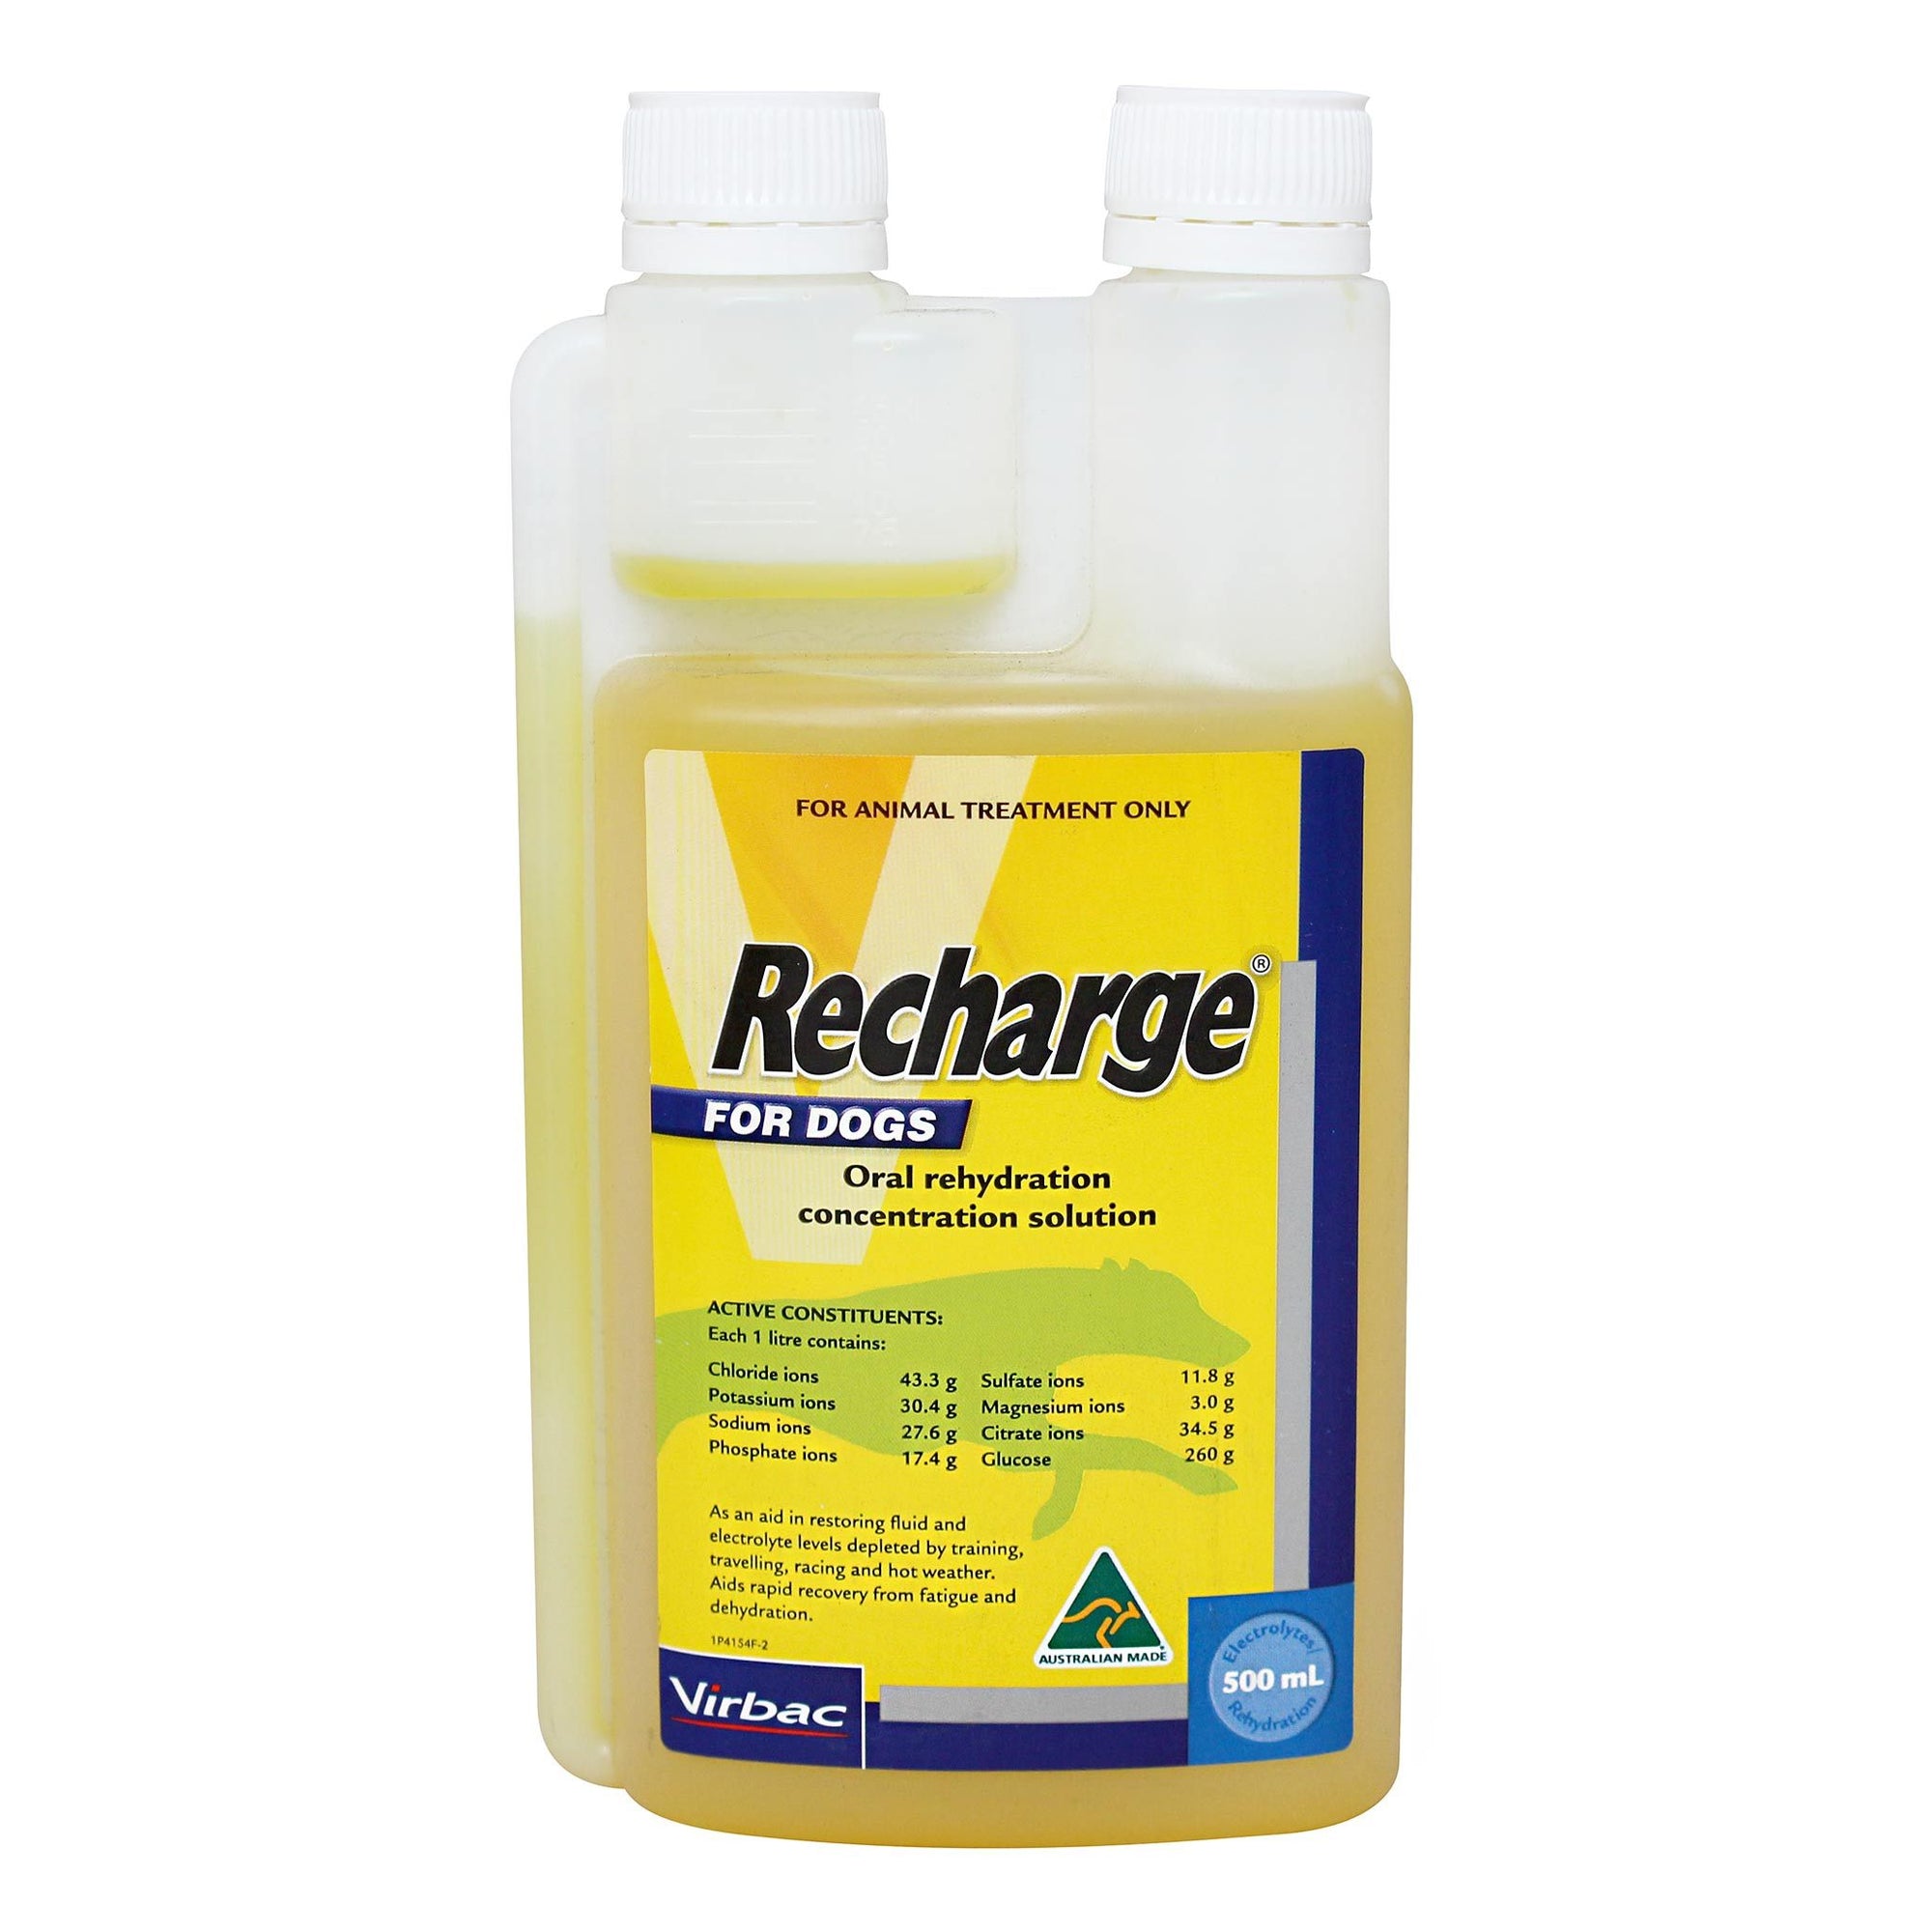 Virbac Recharge for Dogs 1ltr